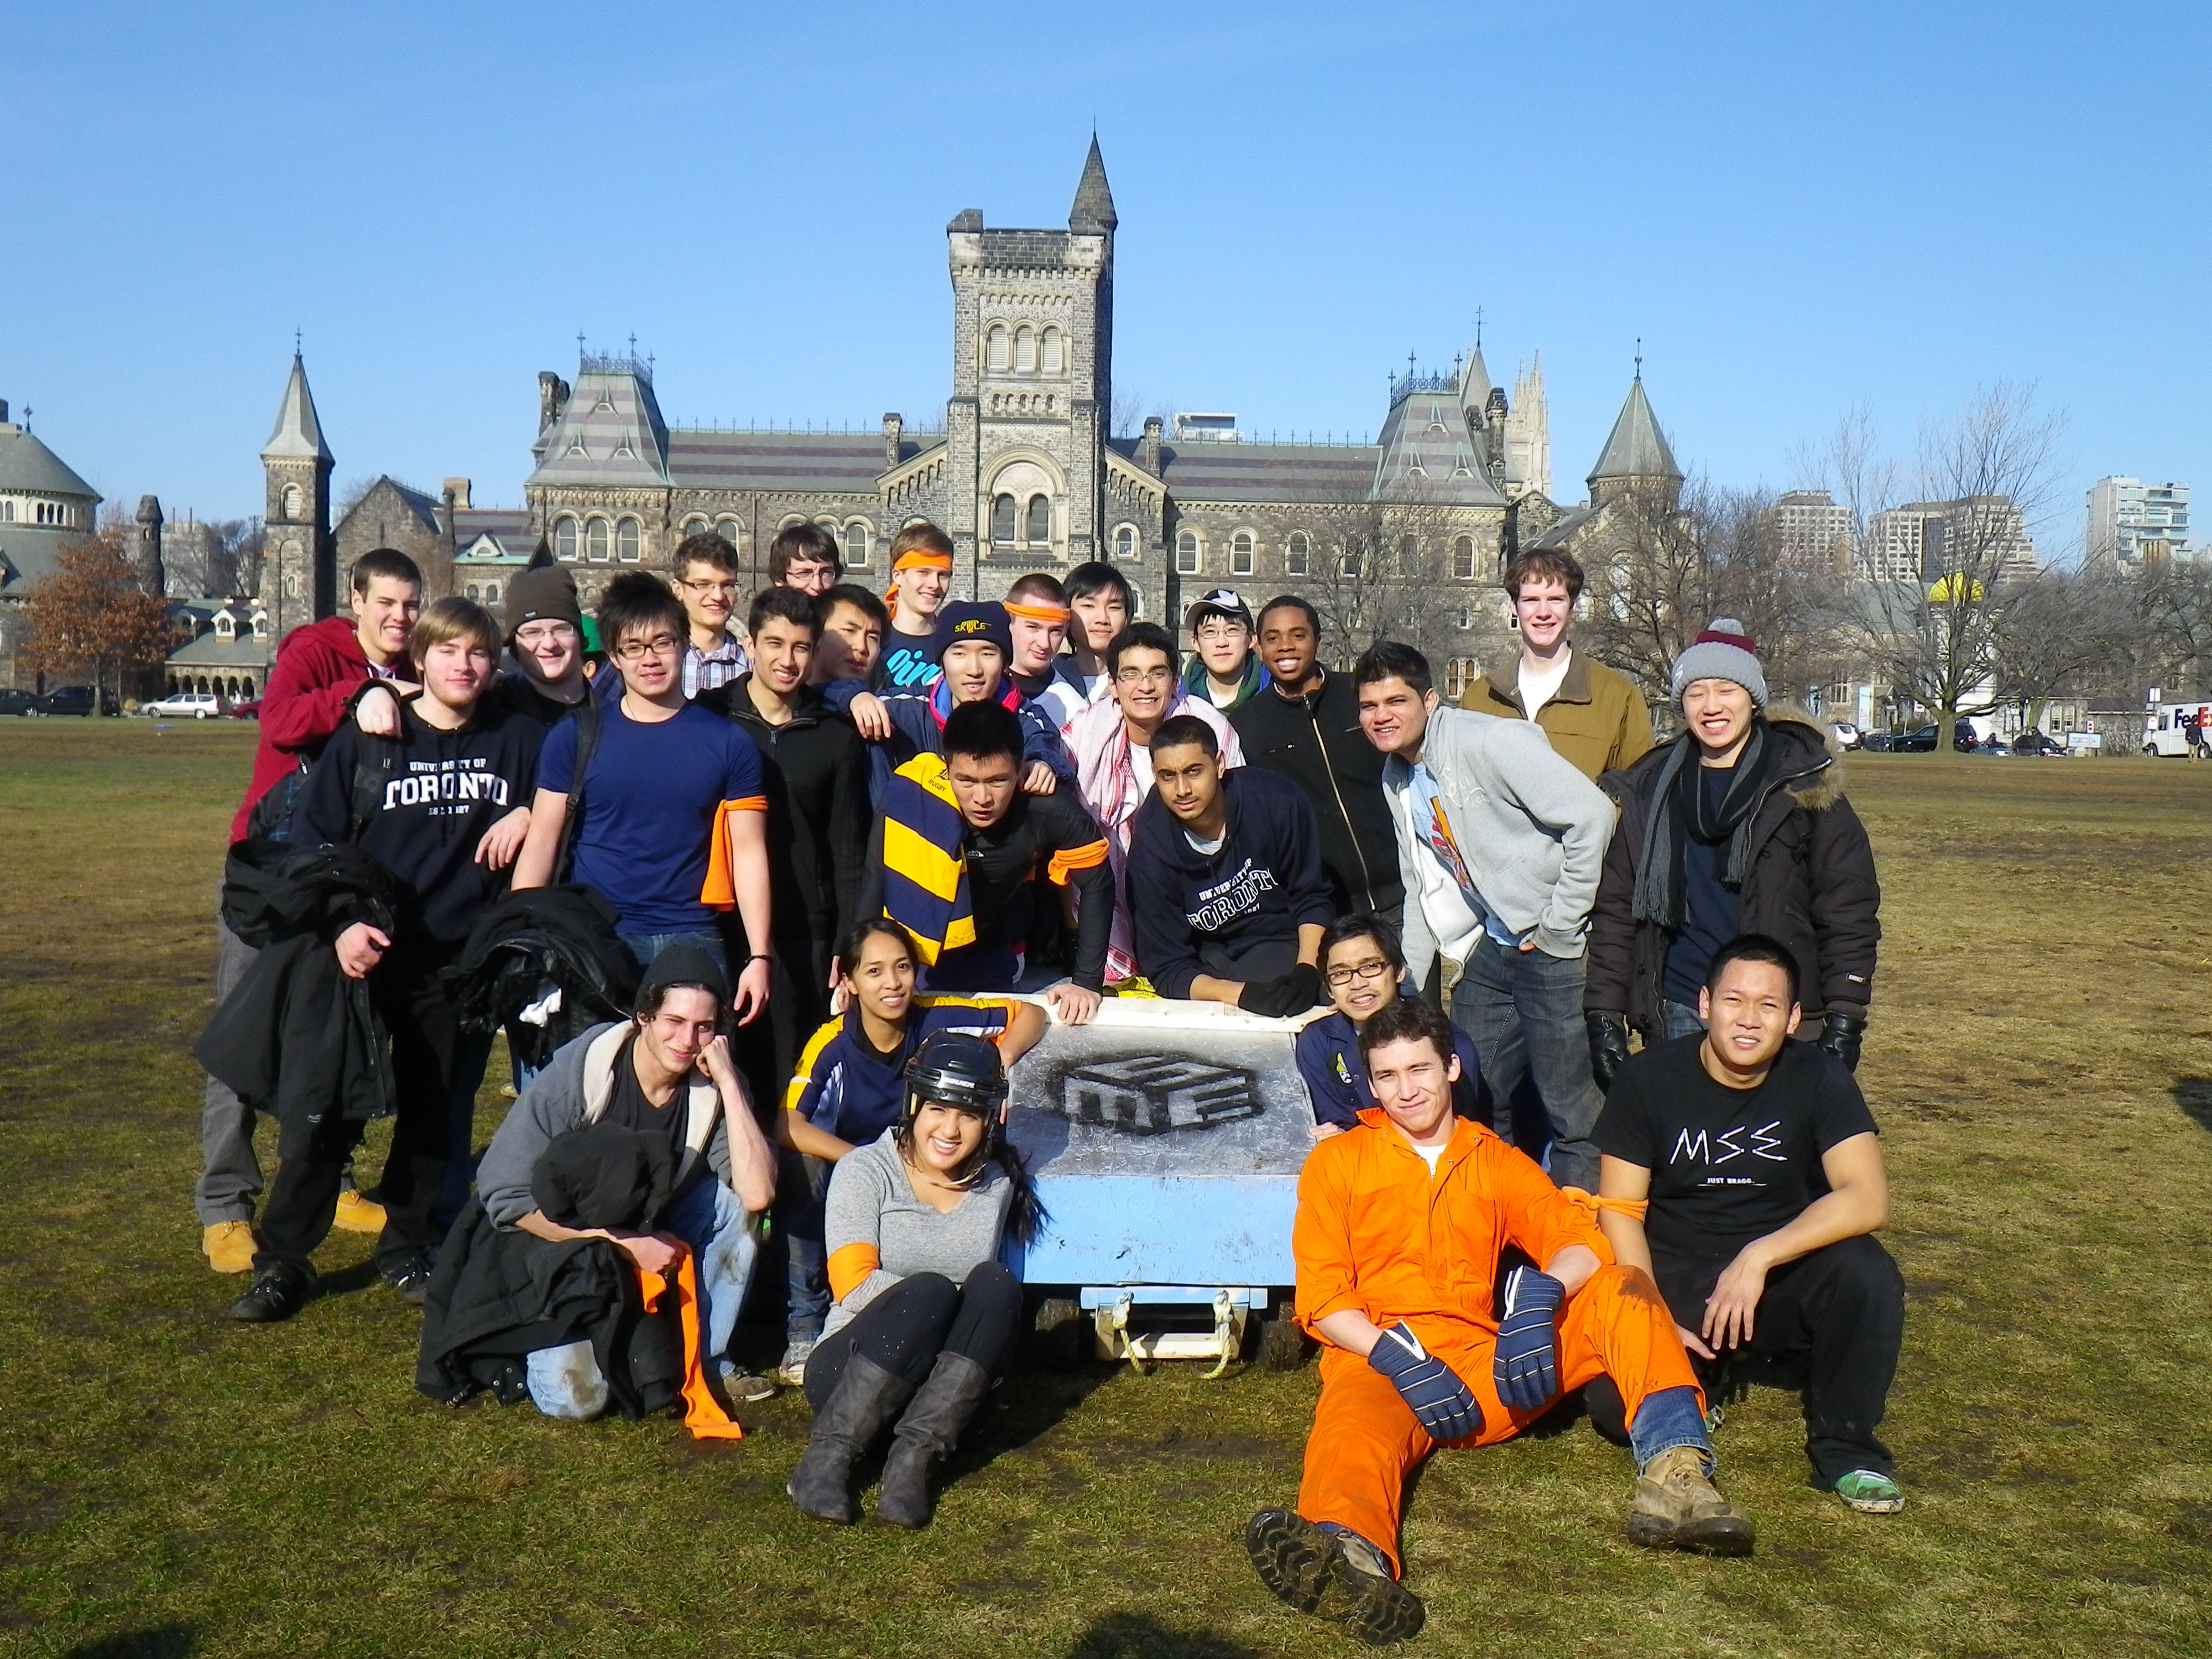 Ye Grande Olde Chariot Races 1T2: Although MSE may be one of the smaller disciplines in the faculty, they certainly do not lack in spirit. Here they are posing after putting their newly built chariot to the test